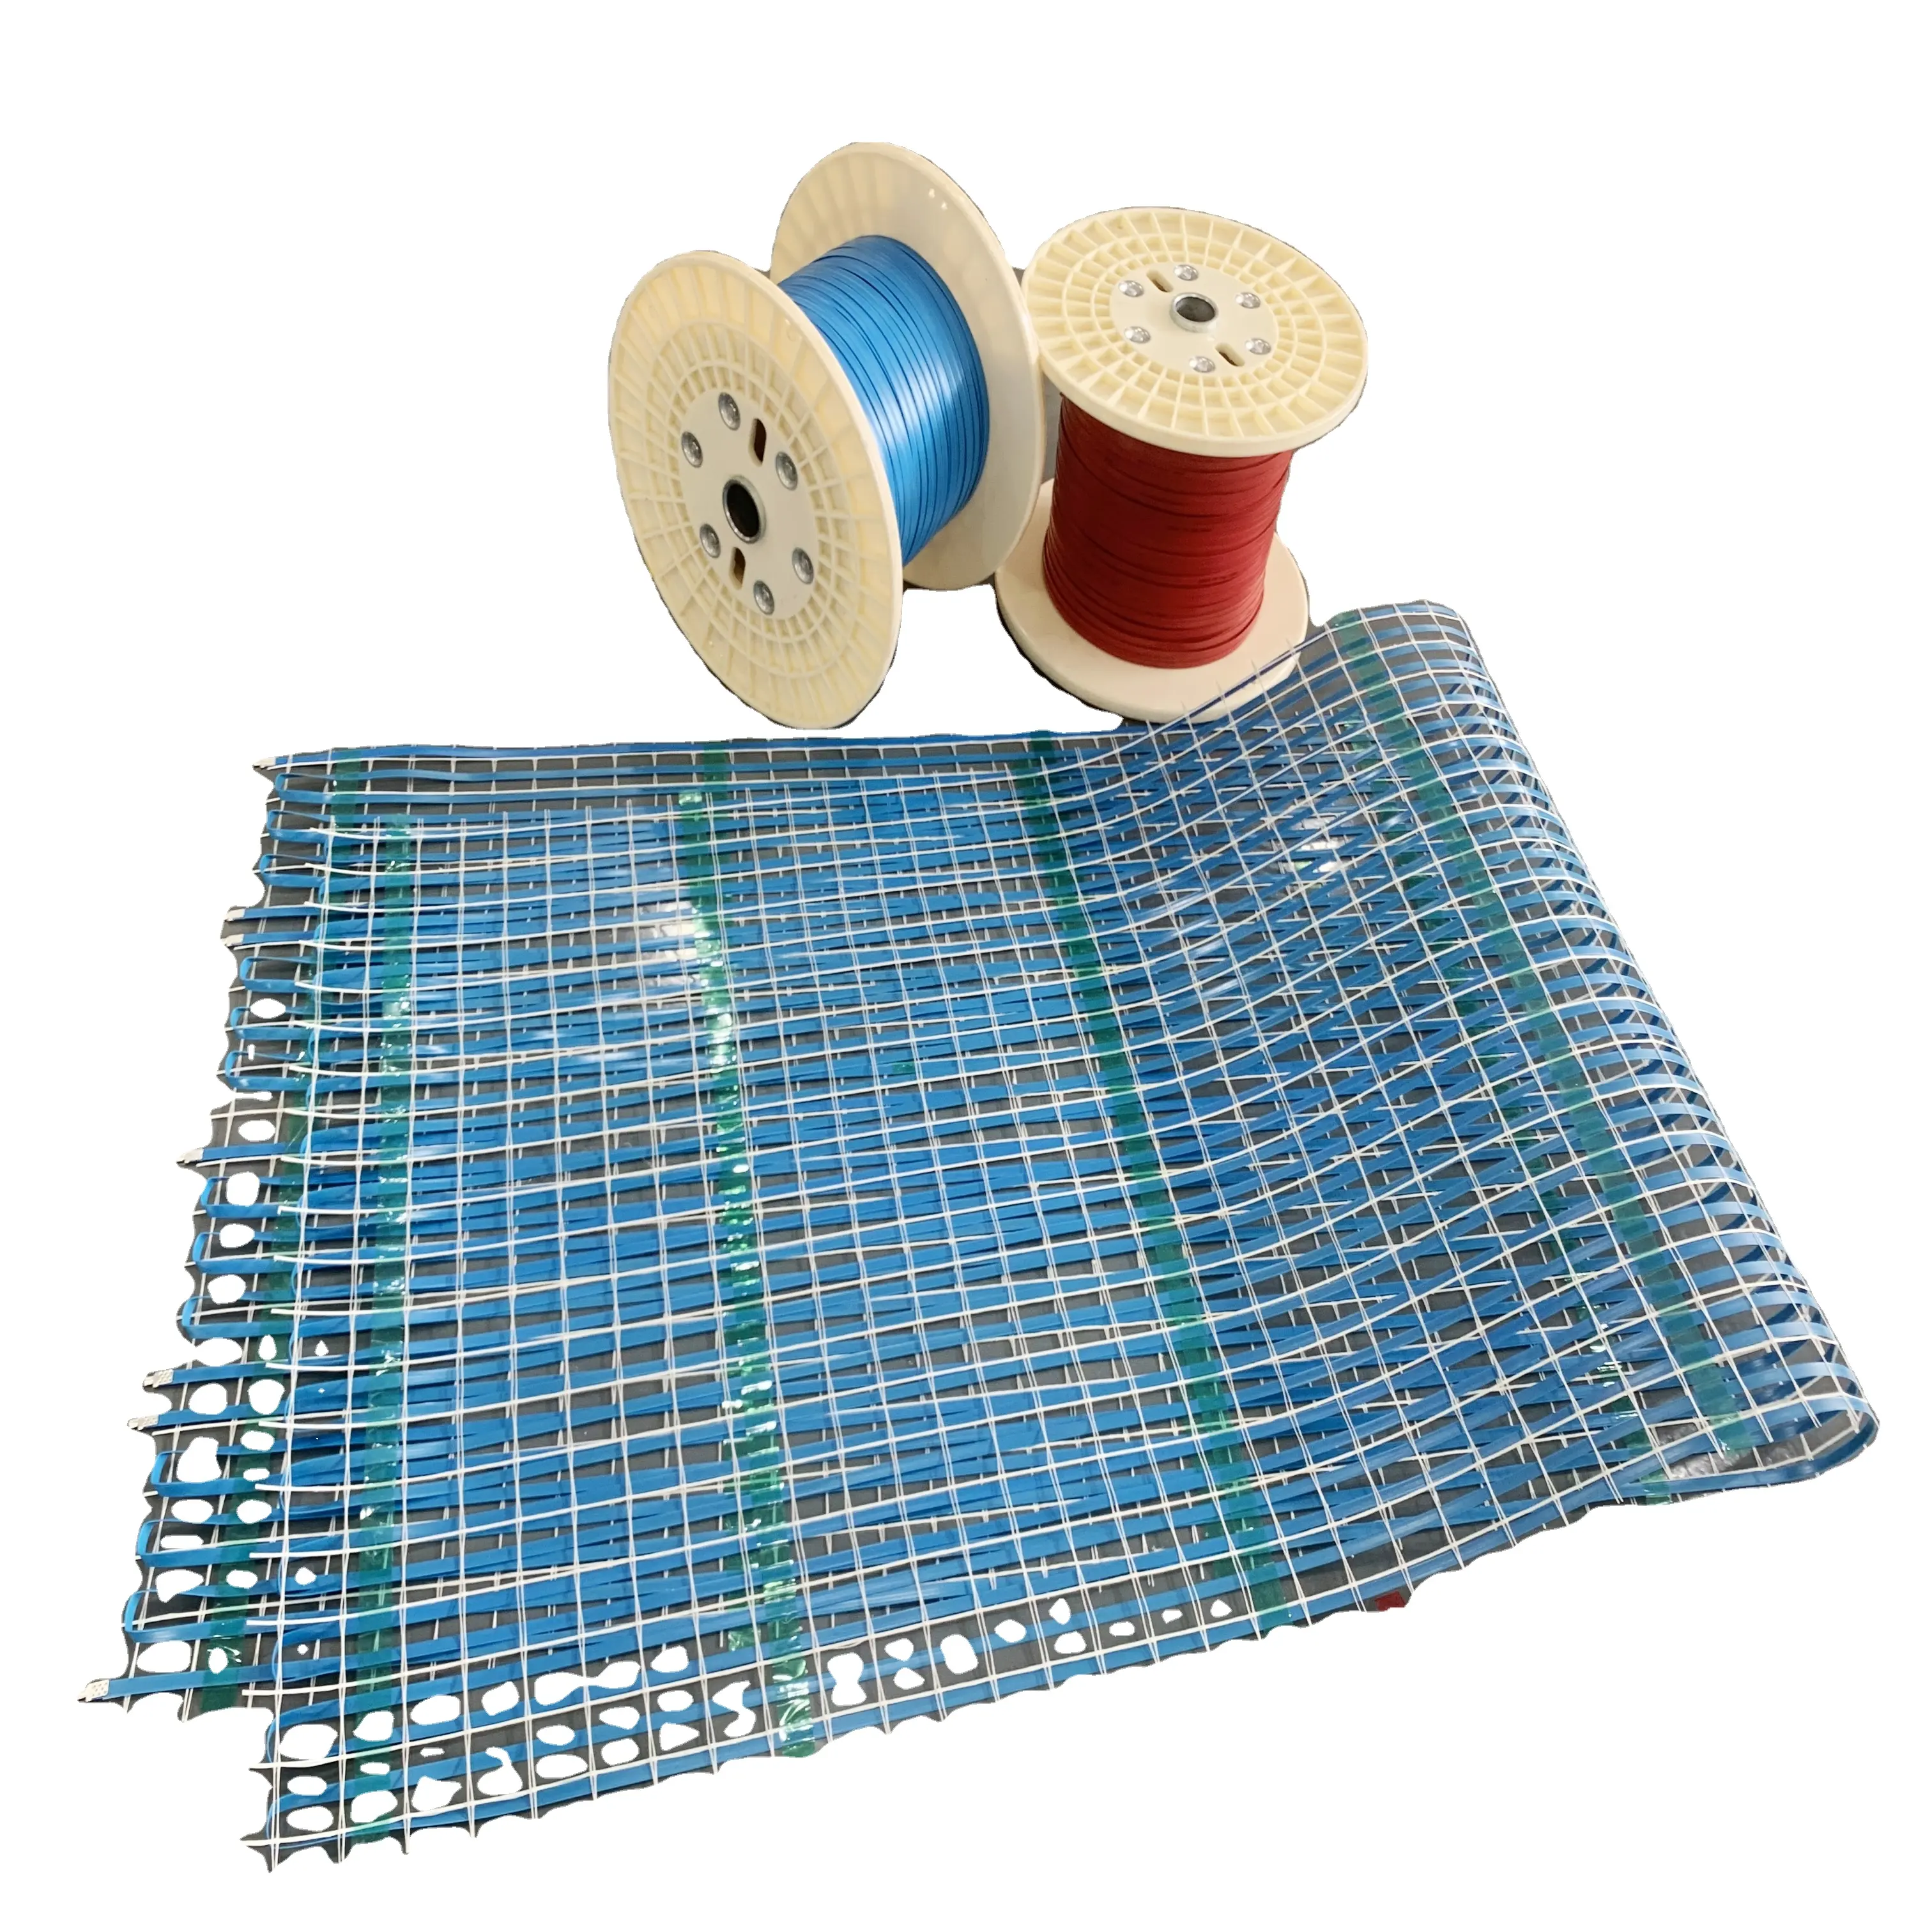 D110V450W301008 CE Approved electrical under tile cold winter underground heating mat warmwood floor heating cable mat